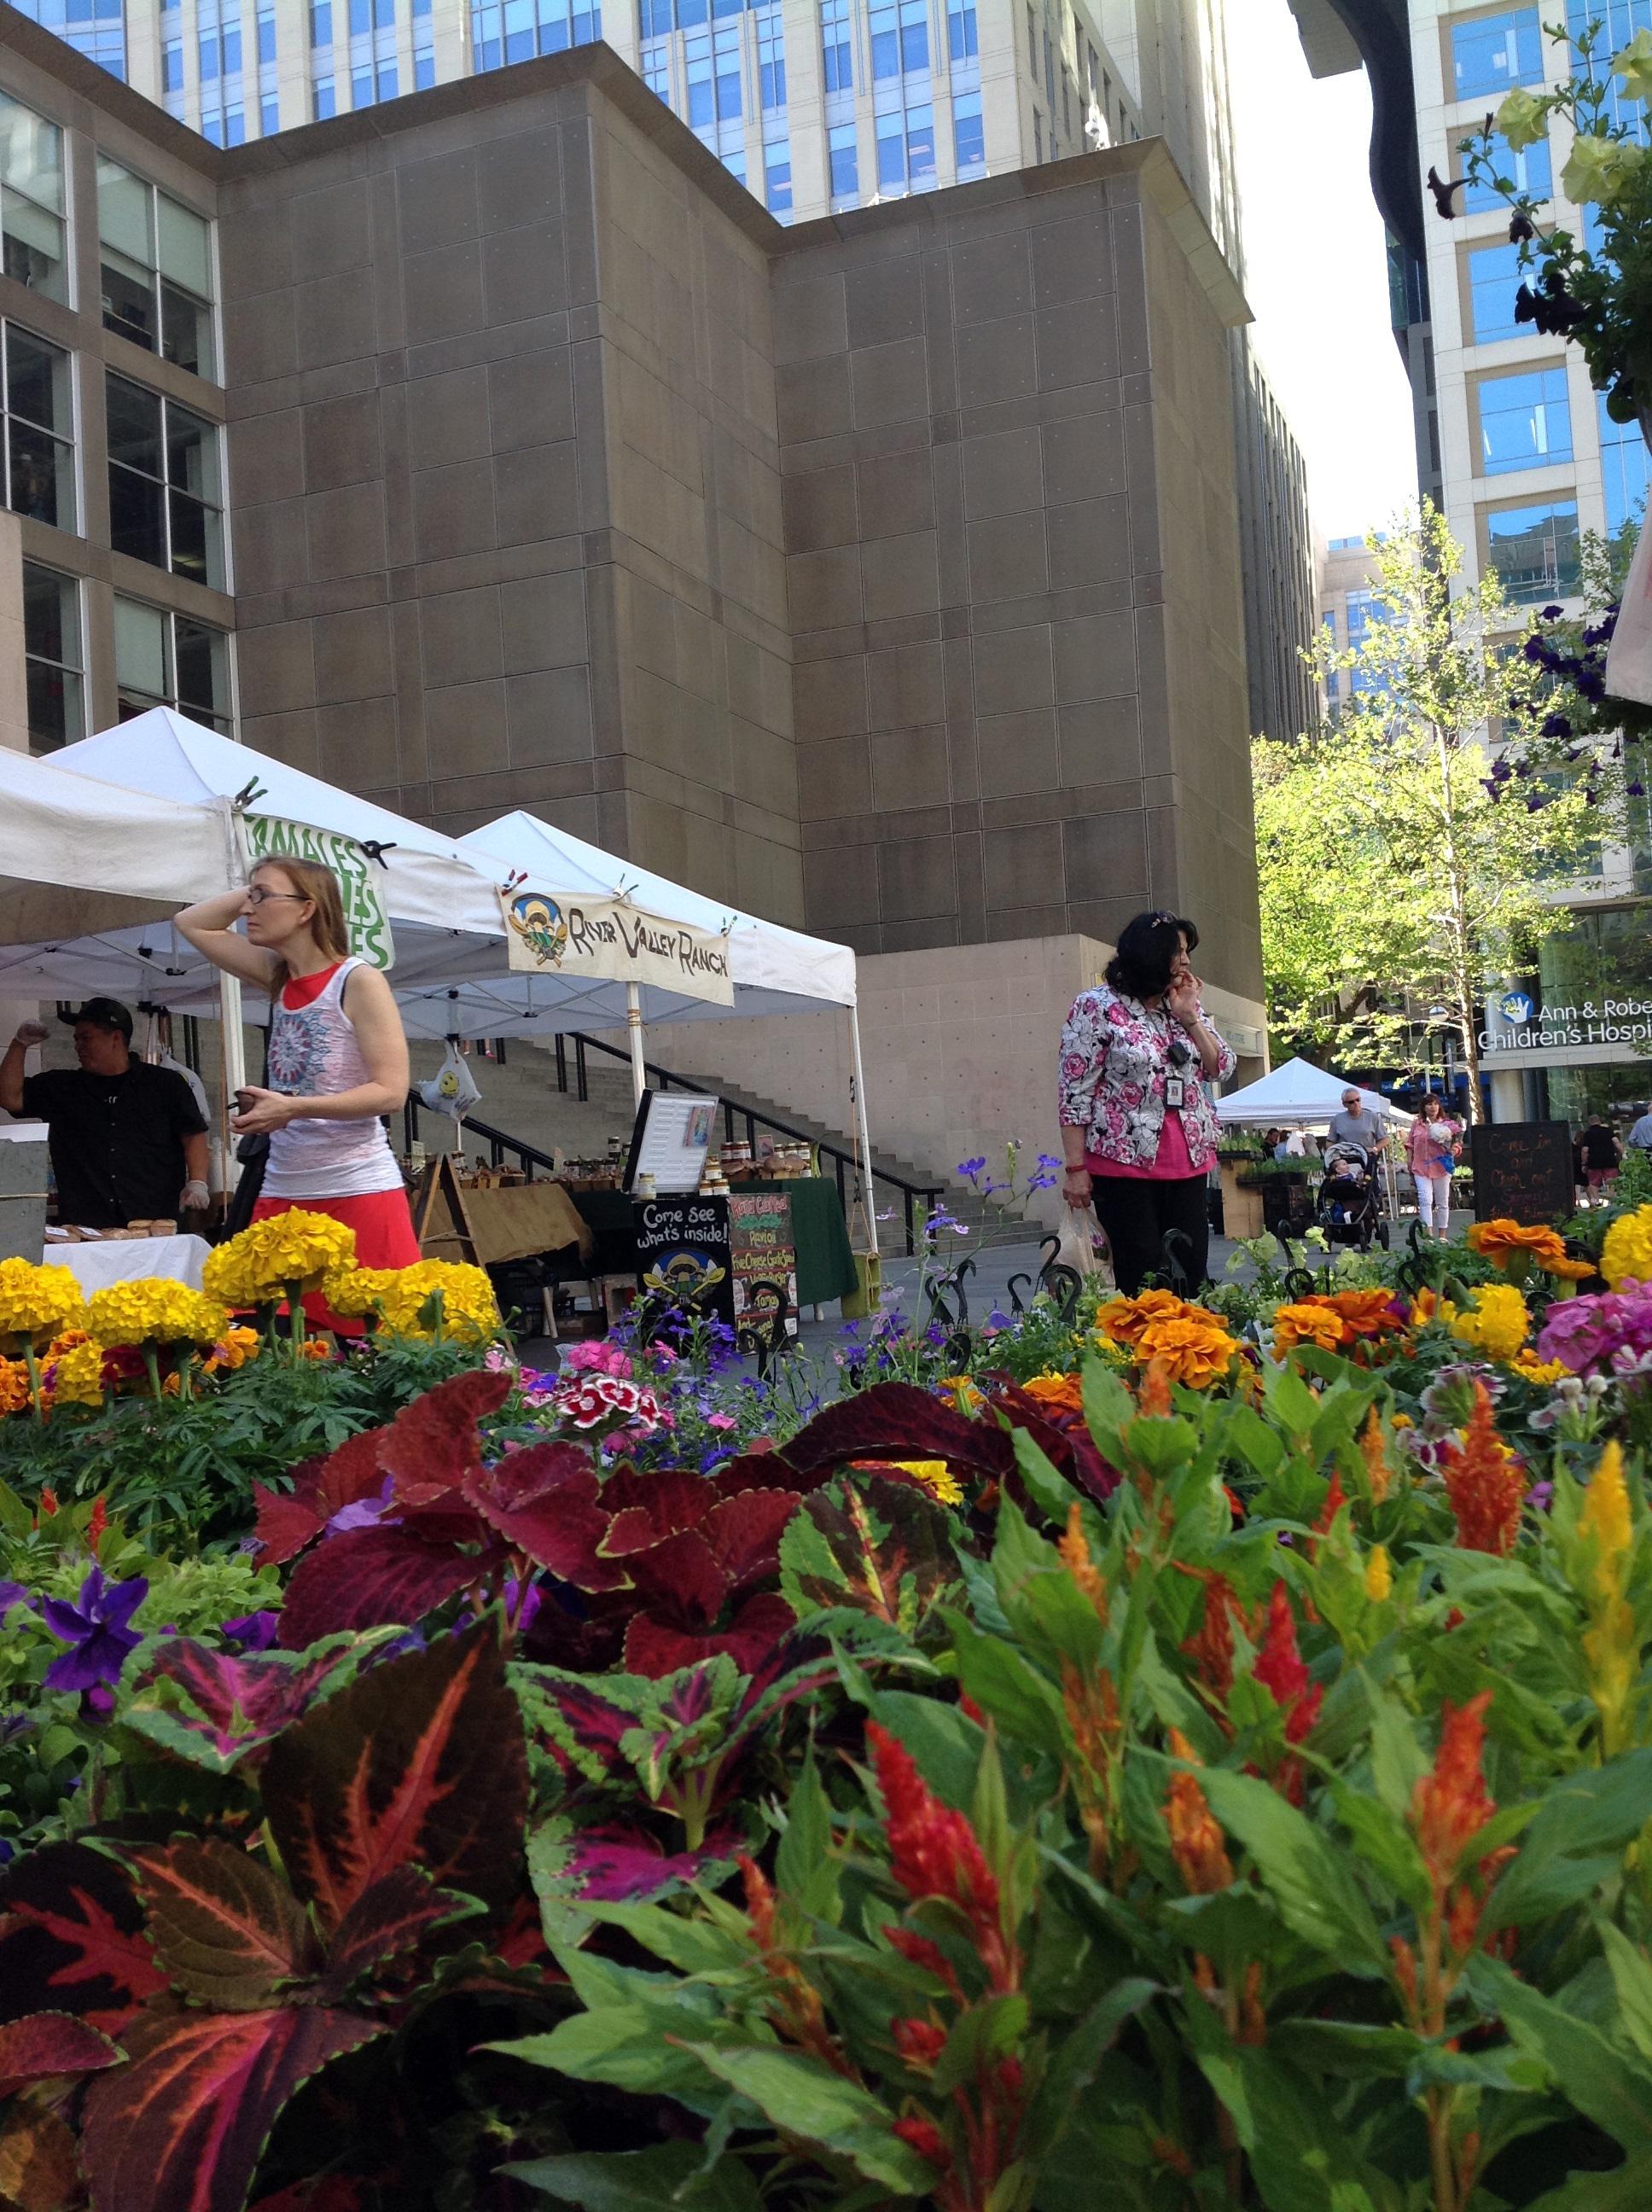 Farmers' market tents and shoppers on the MCA Plaza with flowers in the foreground